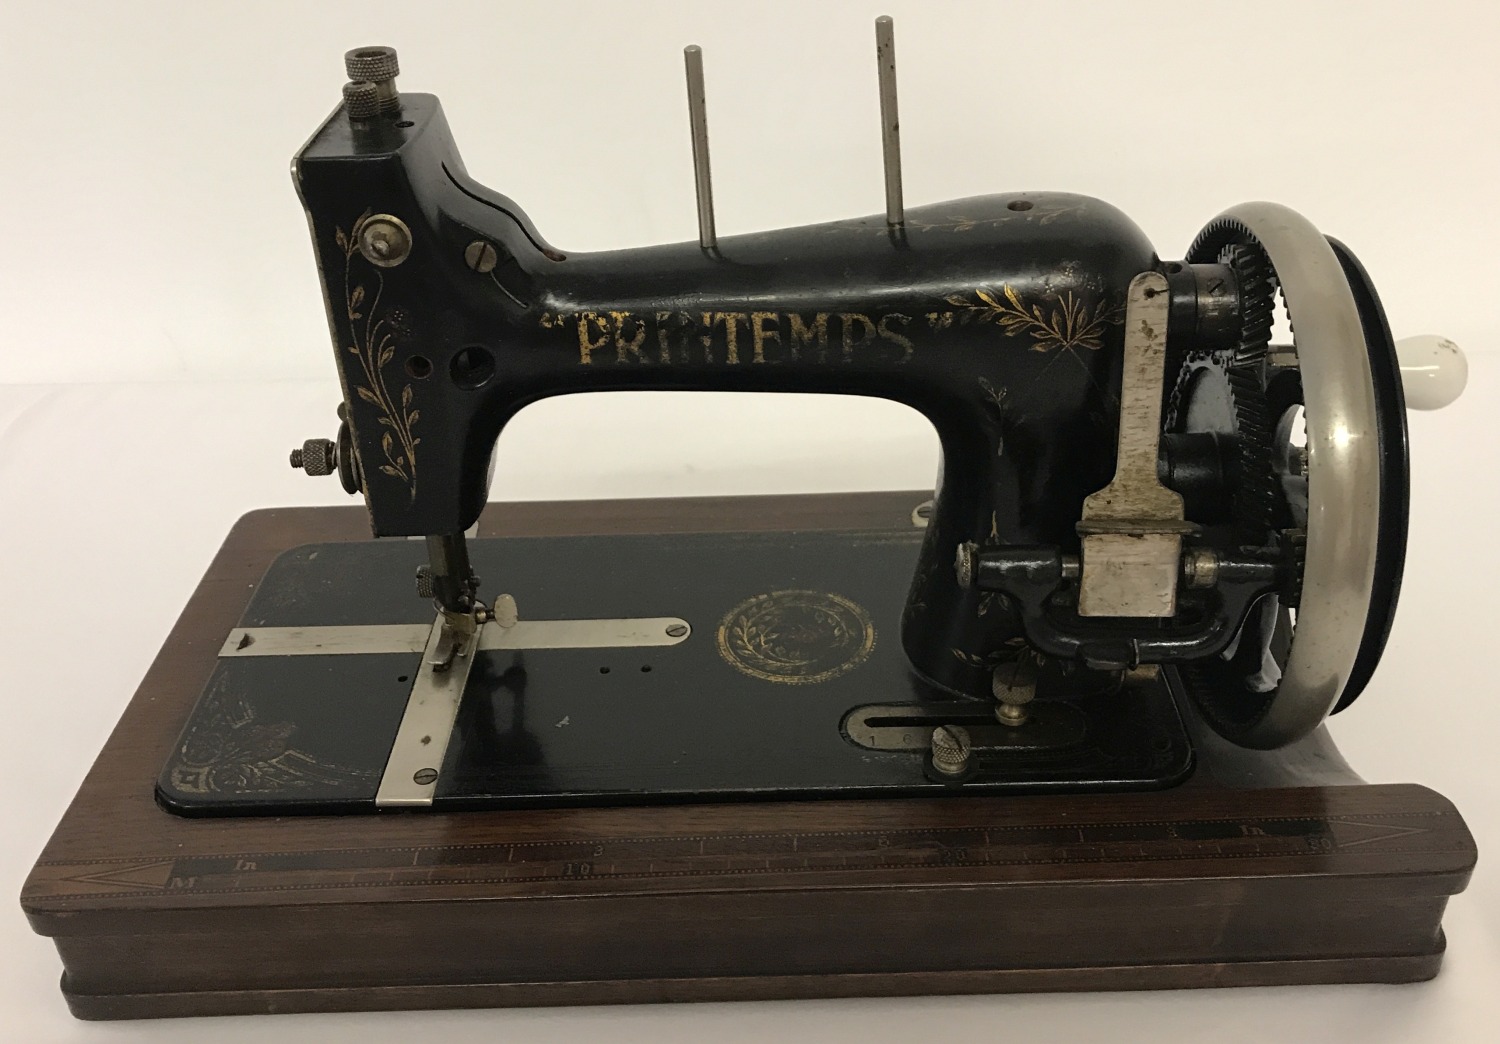 A vintage Printemps hand sewing machine with gilt detail, folding enamel handle & inlaid wooden base